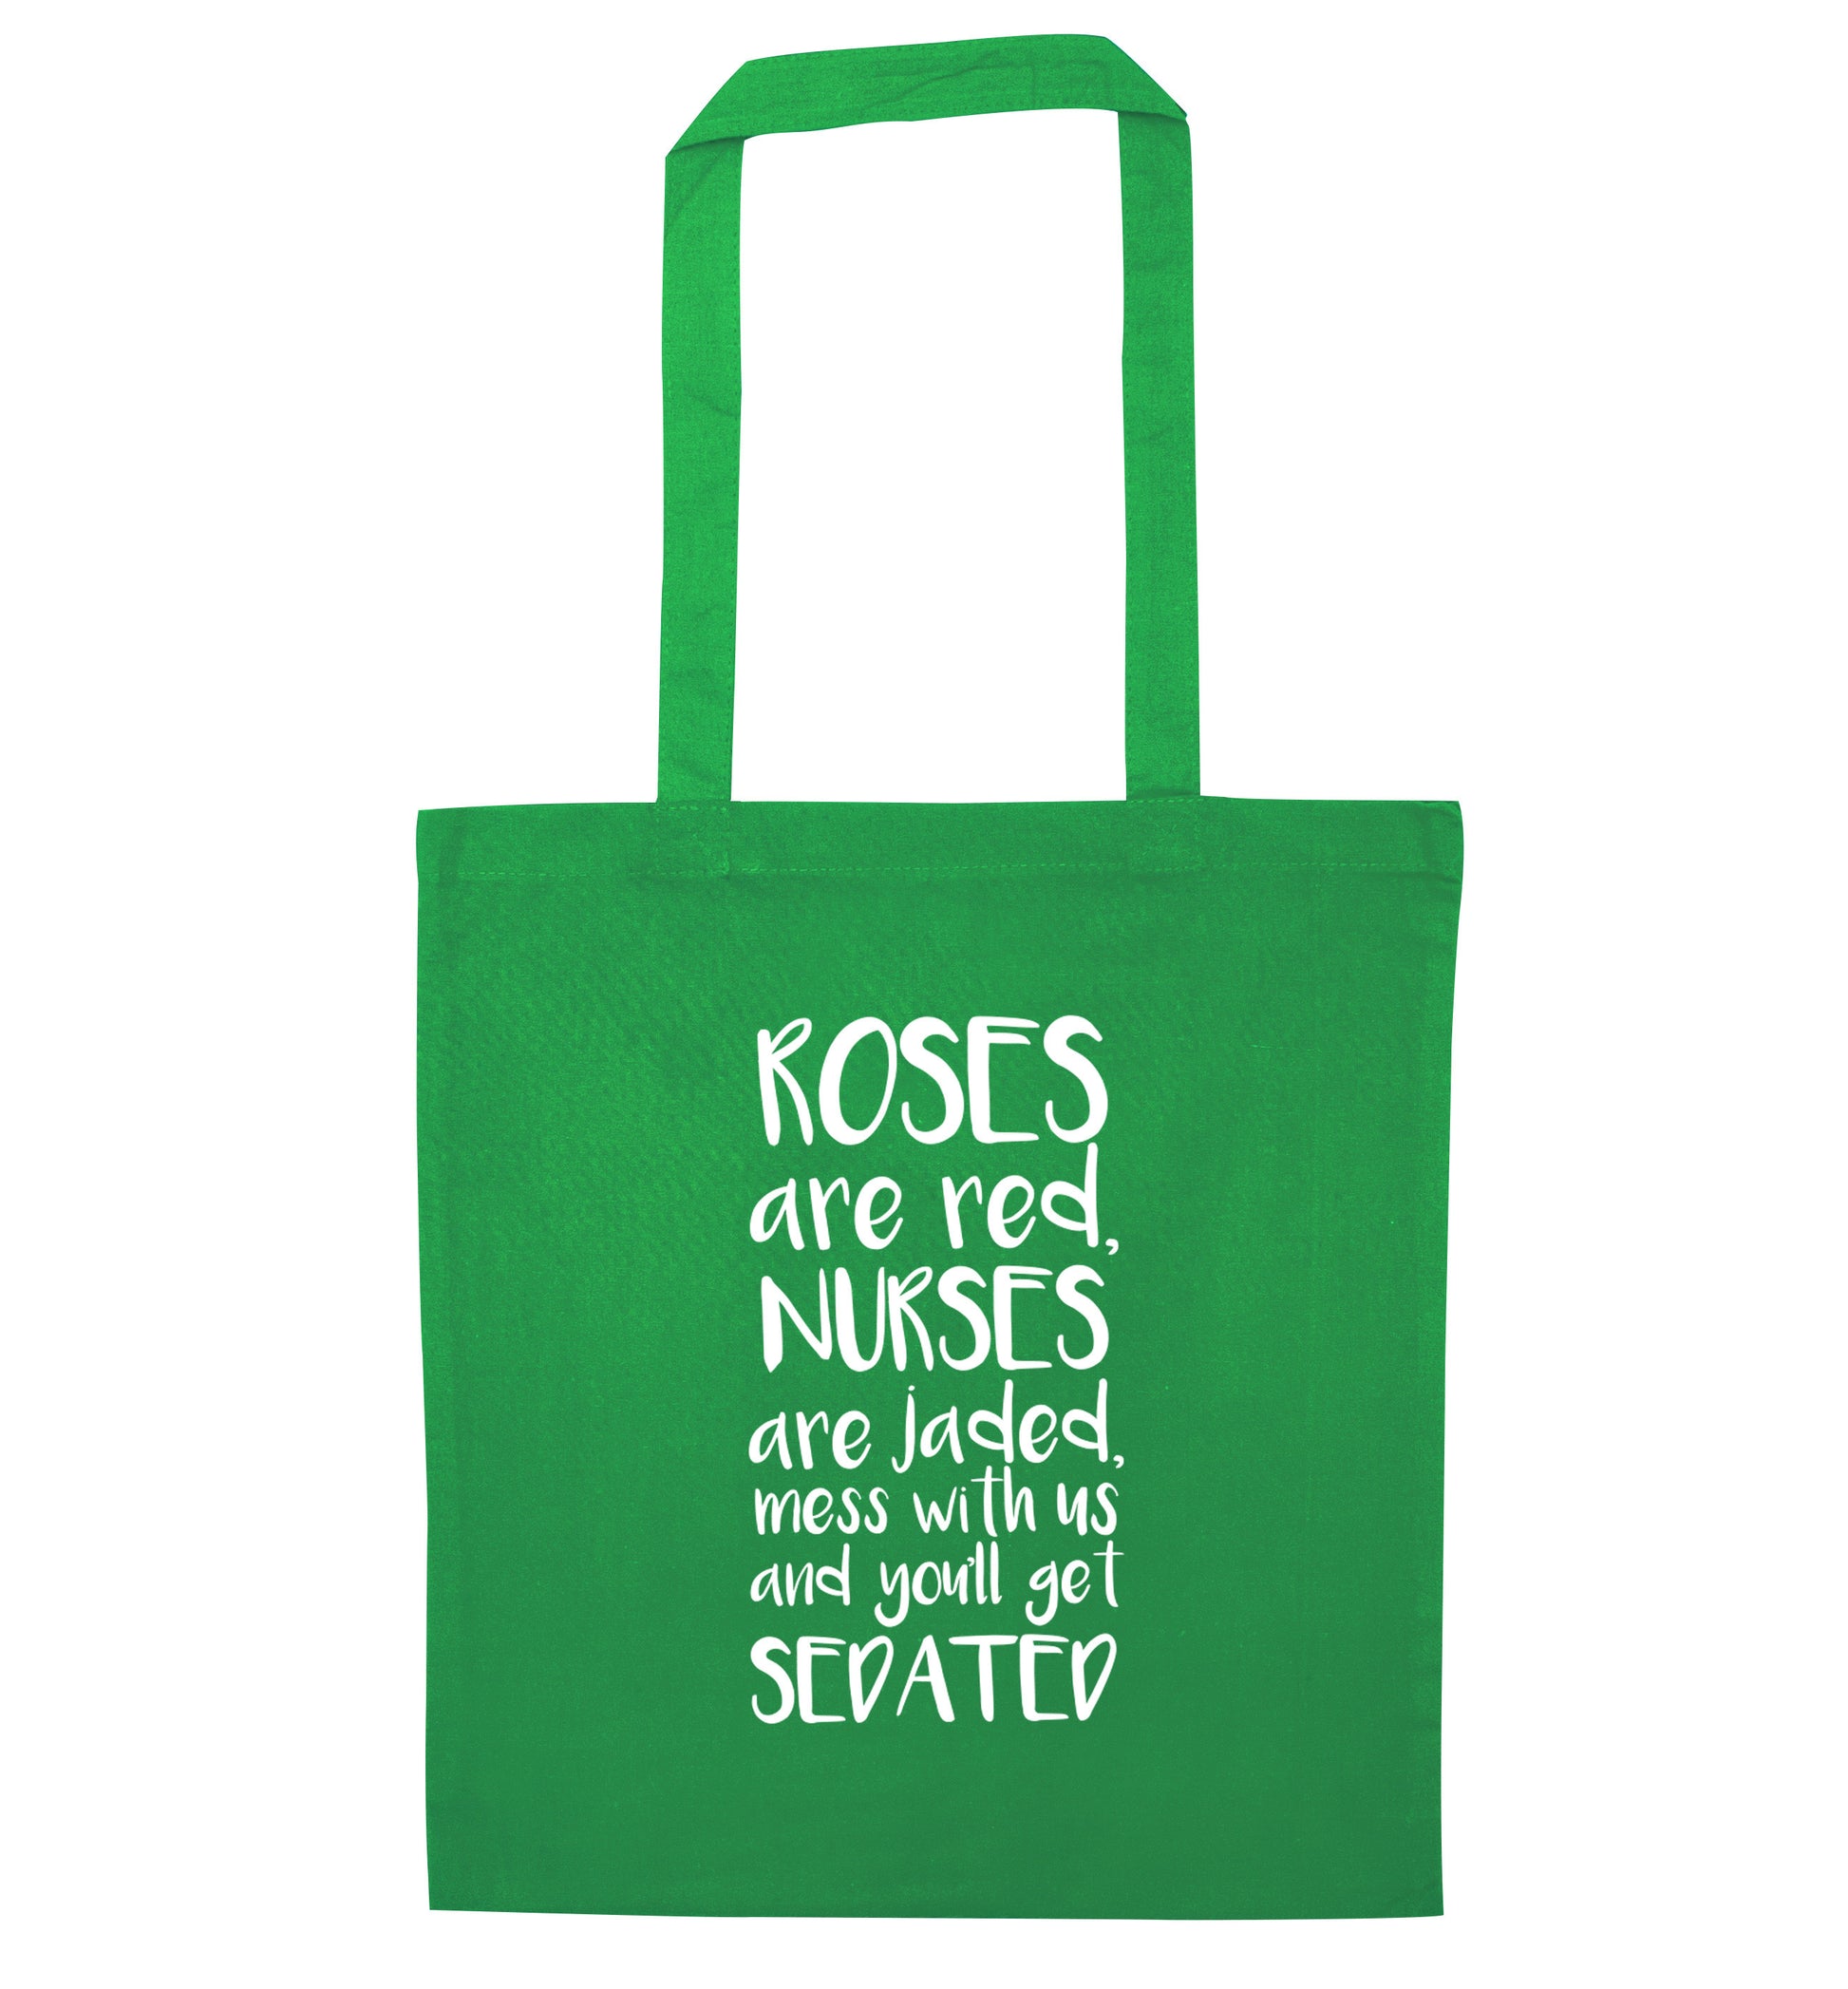 Roses are red, nurses are jaded, mess with us and you'll get sedated green tote bag